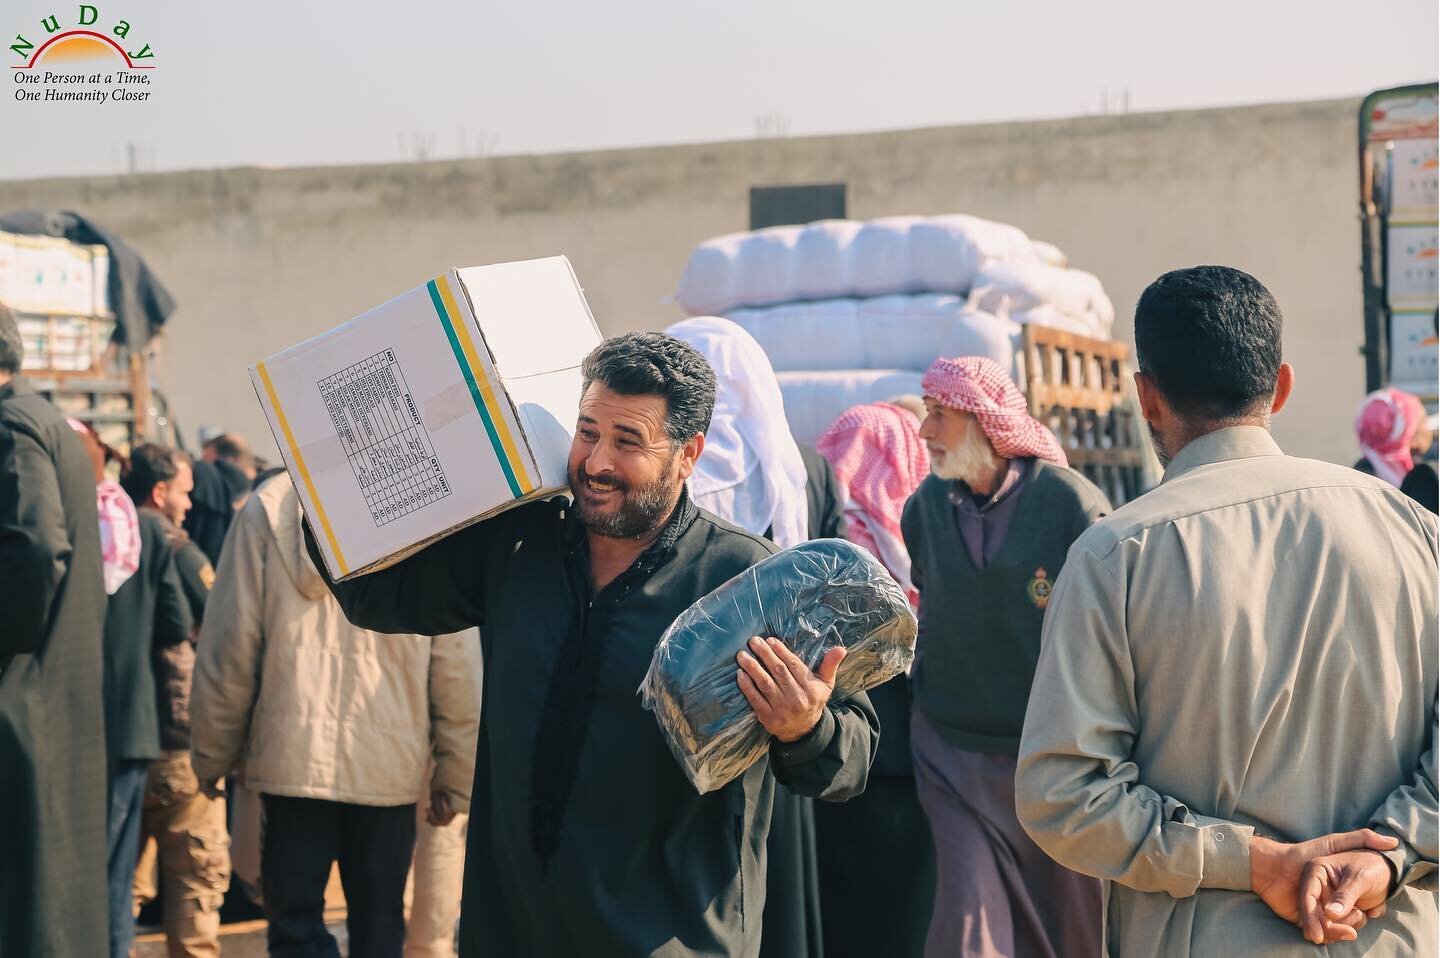 TravlerPacks being distributed by our on-the-ground partner NuDay in Idlib, Syria during January 2023.

TravlerPack provides a sustainable and cost effective solution to address challenges staying warm during cold winters. Learn more and contribute t